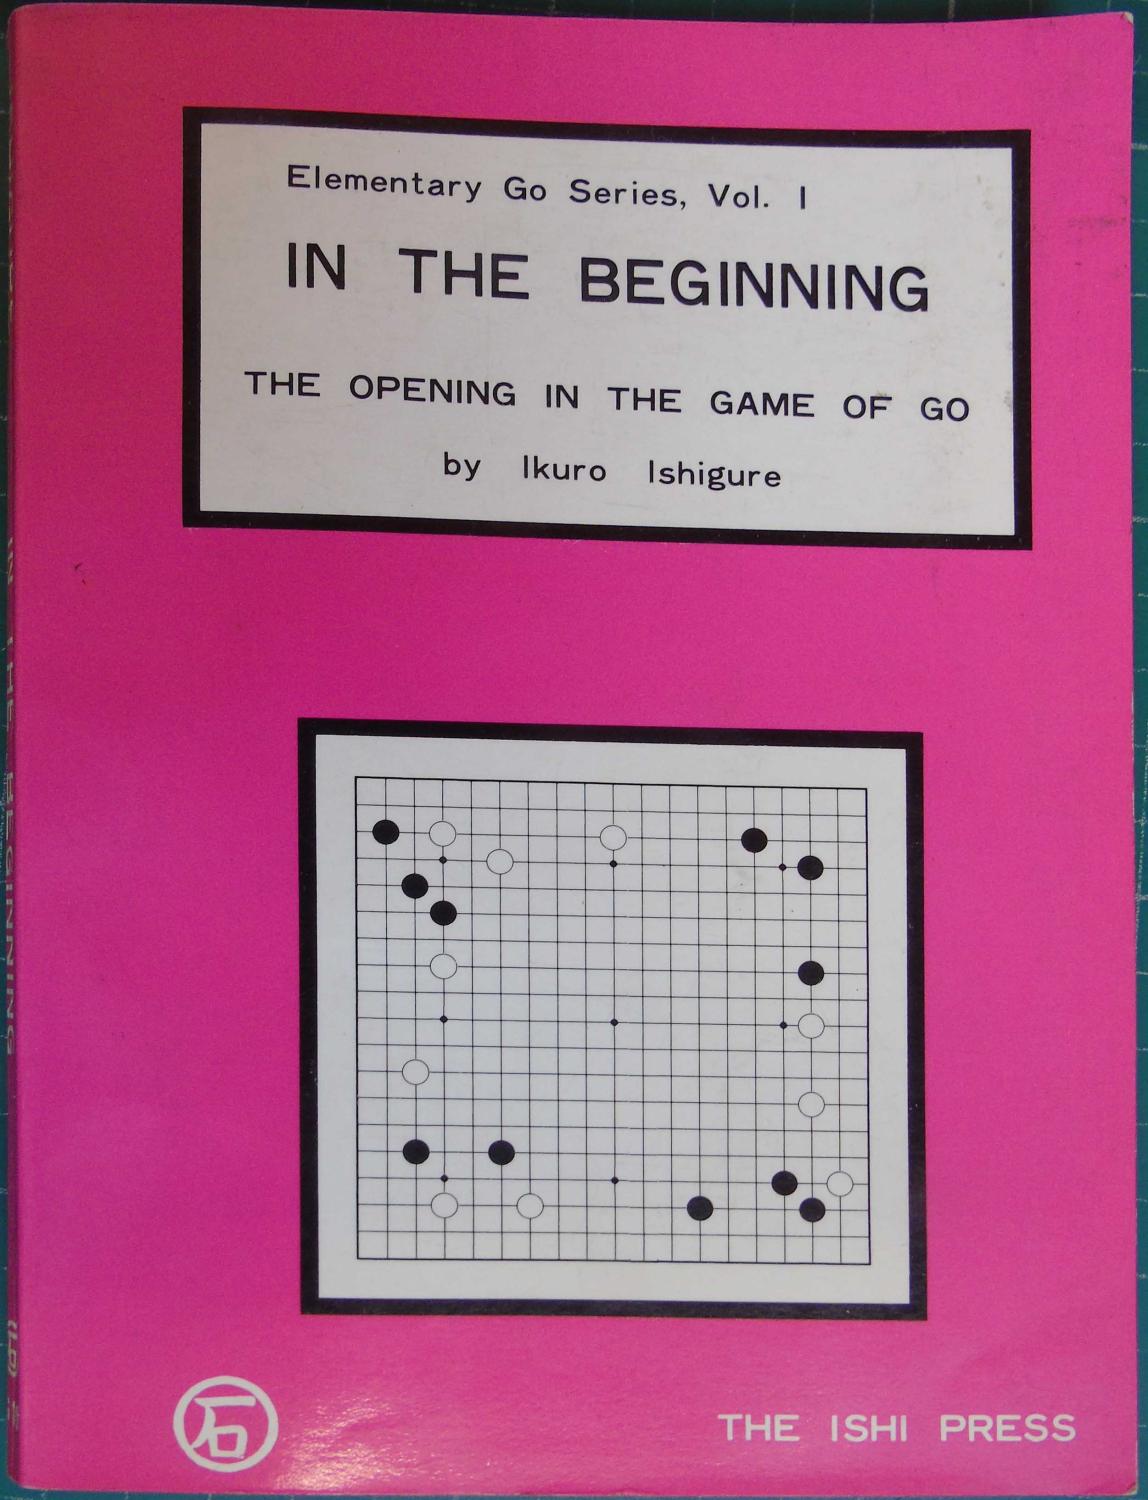 Elementary Go Series Vol 1 - In The Beginning: The Opening of the Game - Ikuro Ishigure